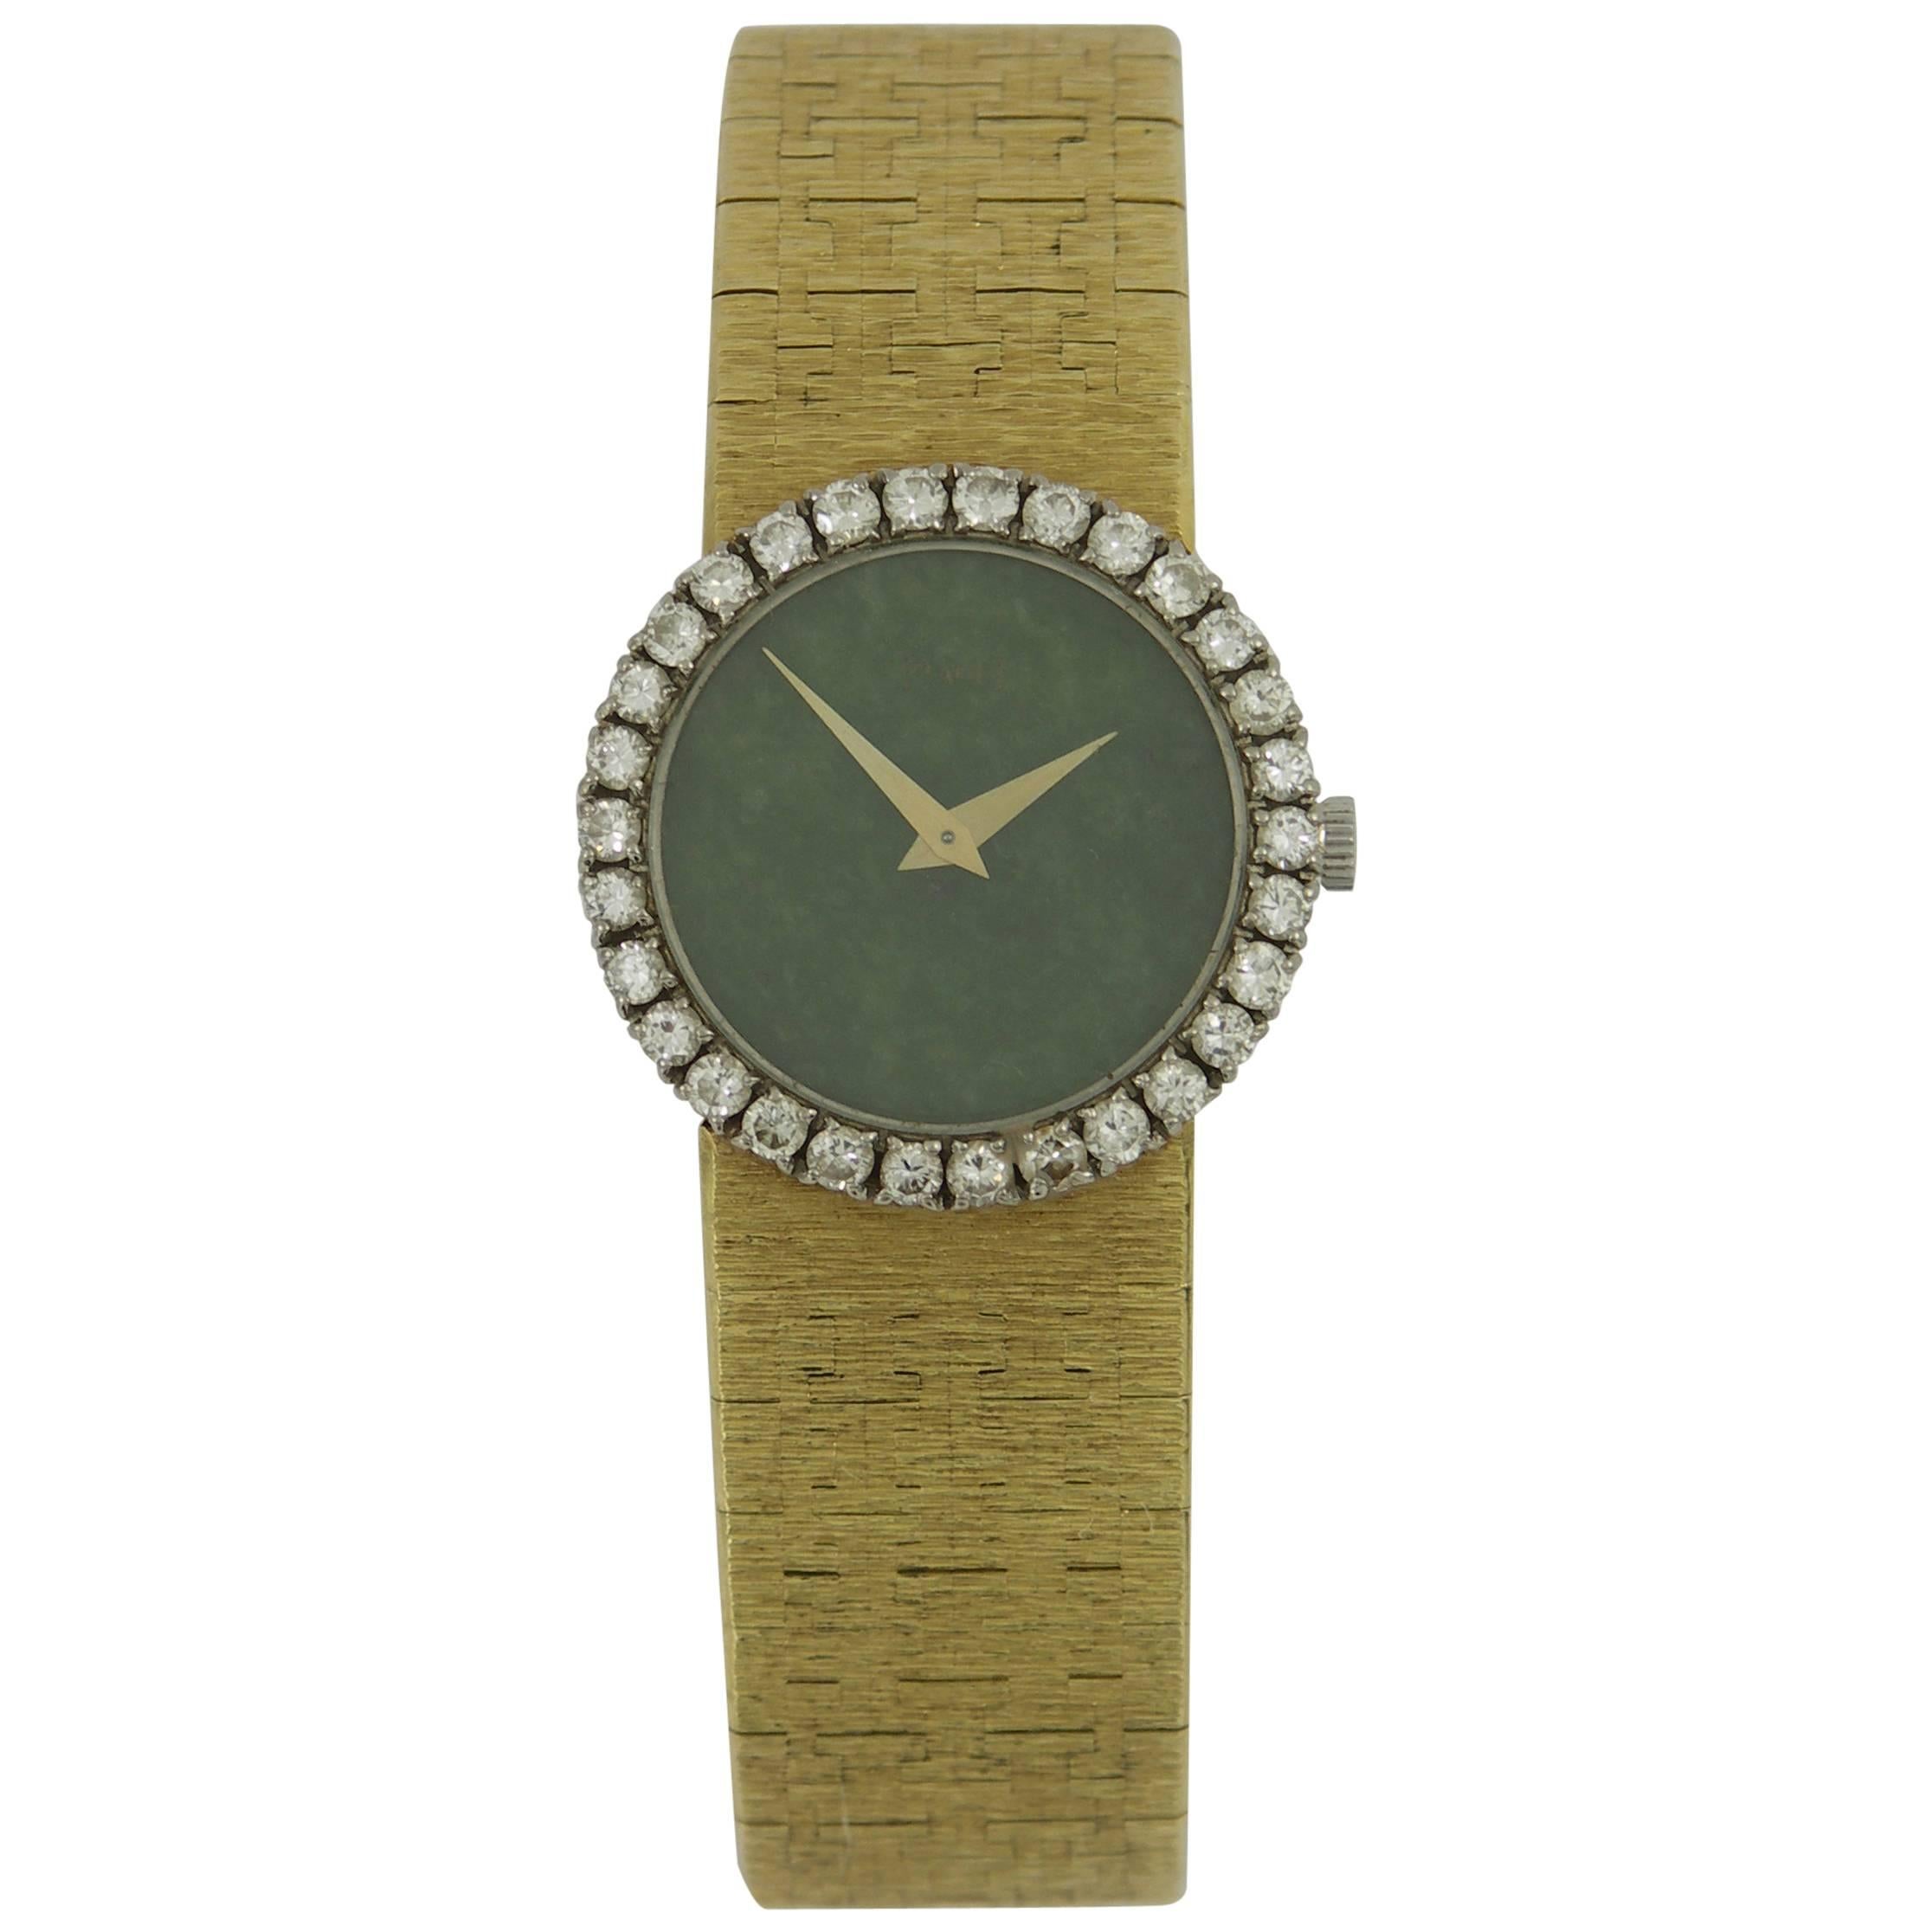 One ladies Piaget wristwatch, with 30 round brilliant cut diamonds, set into the bezel, for a total weight of approximately 1.25ct. The watch also features a rich, green, jade dial. 
Inside circumference is six inches.